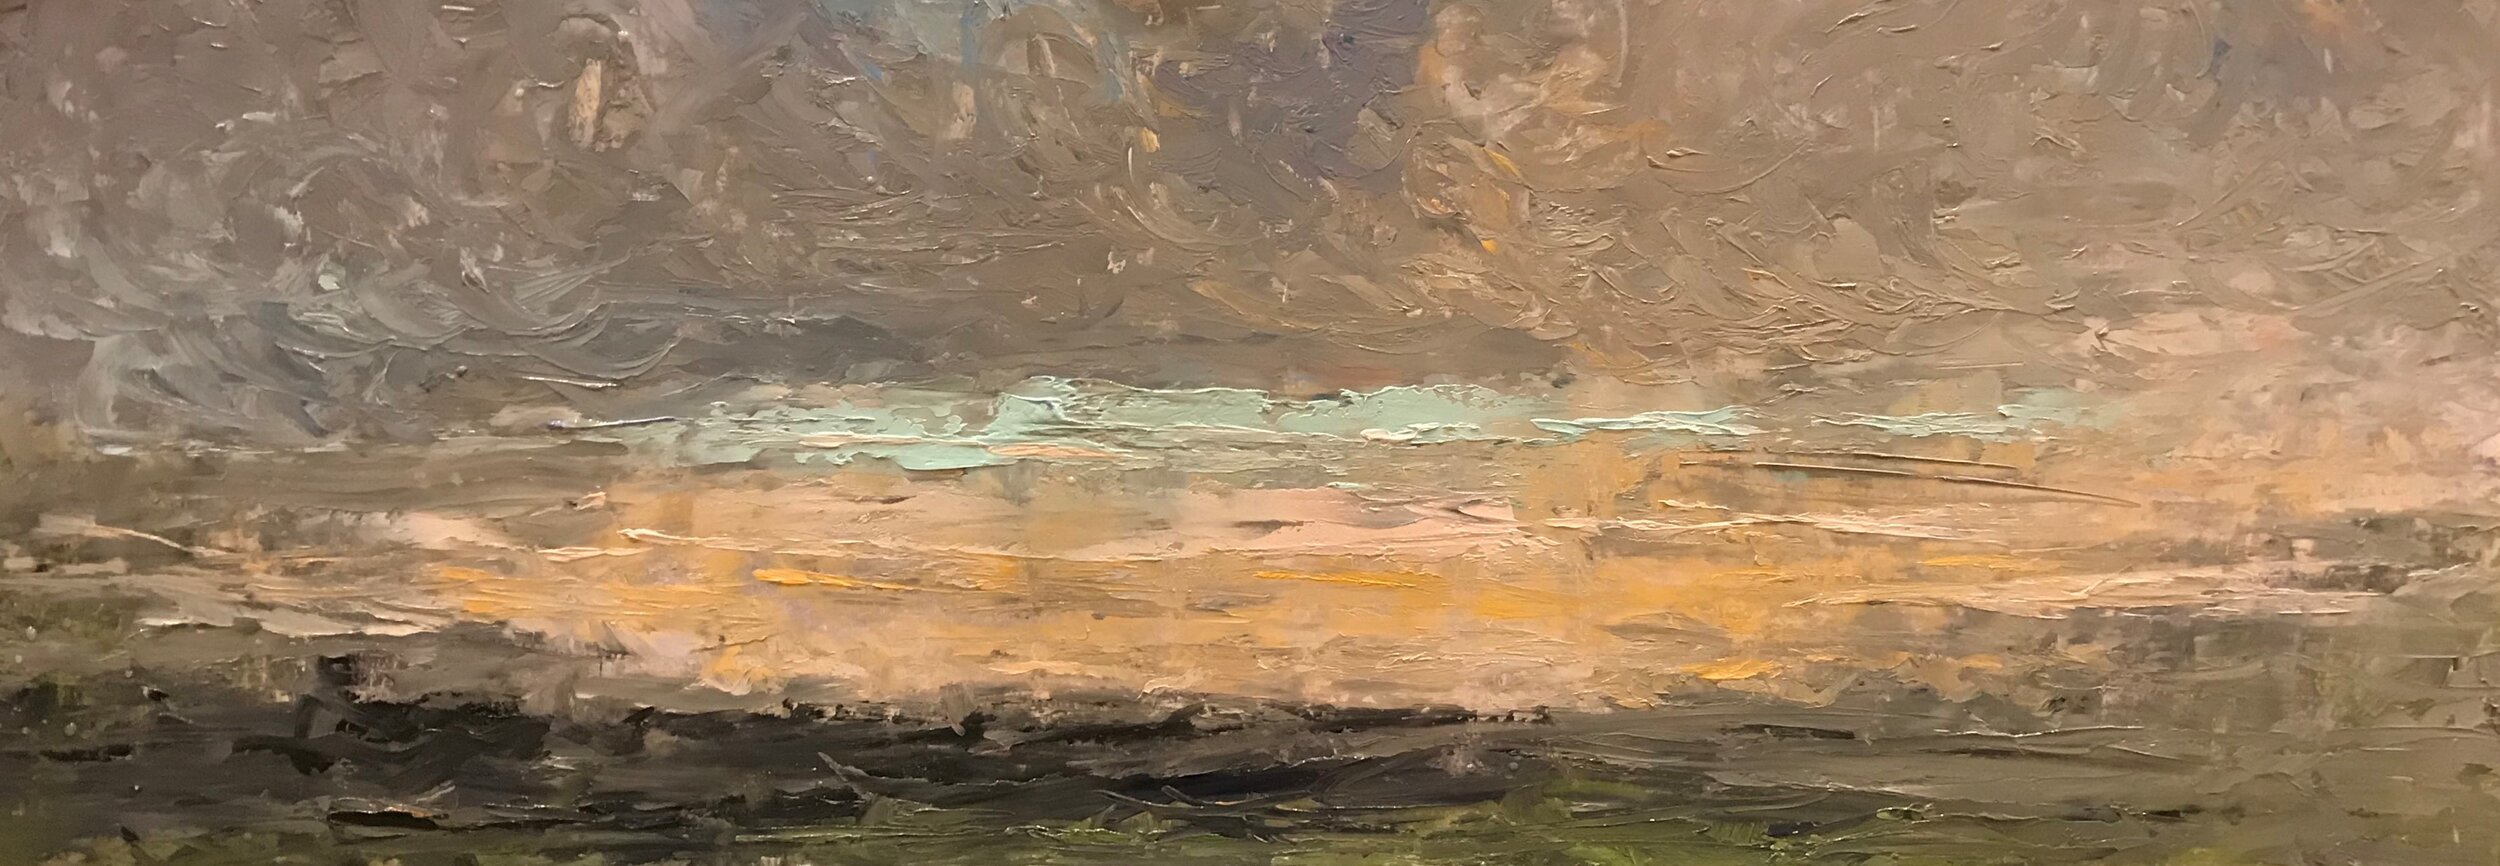 20-05-11  Crazy sky abstraction OIl on Panel  9 x 24 inches.jpg